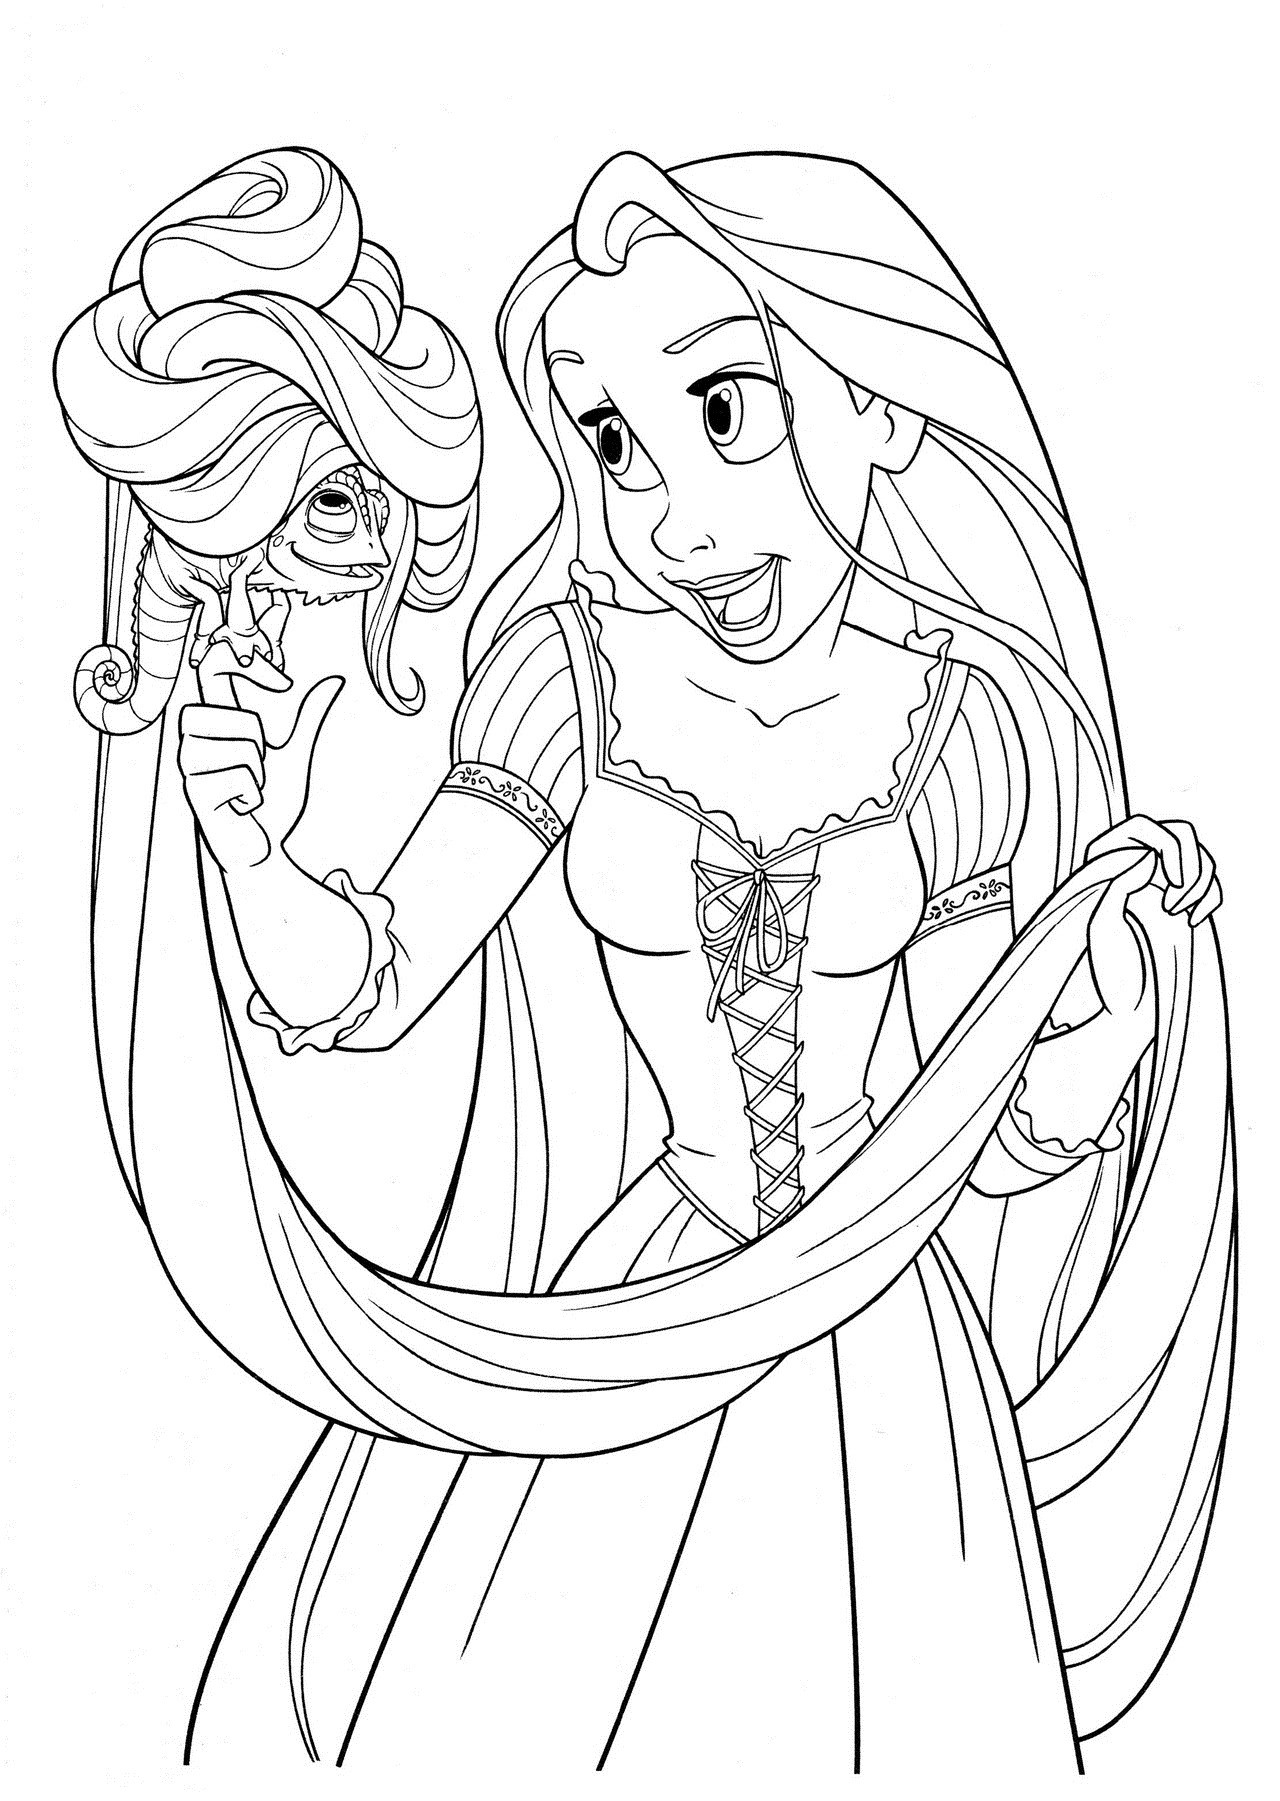 Tangled Coloring Pages
 Free Printable Tangled Coloring Pages For Kids